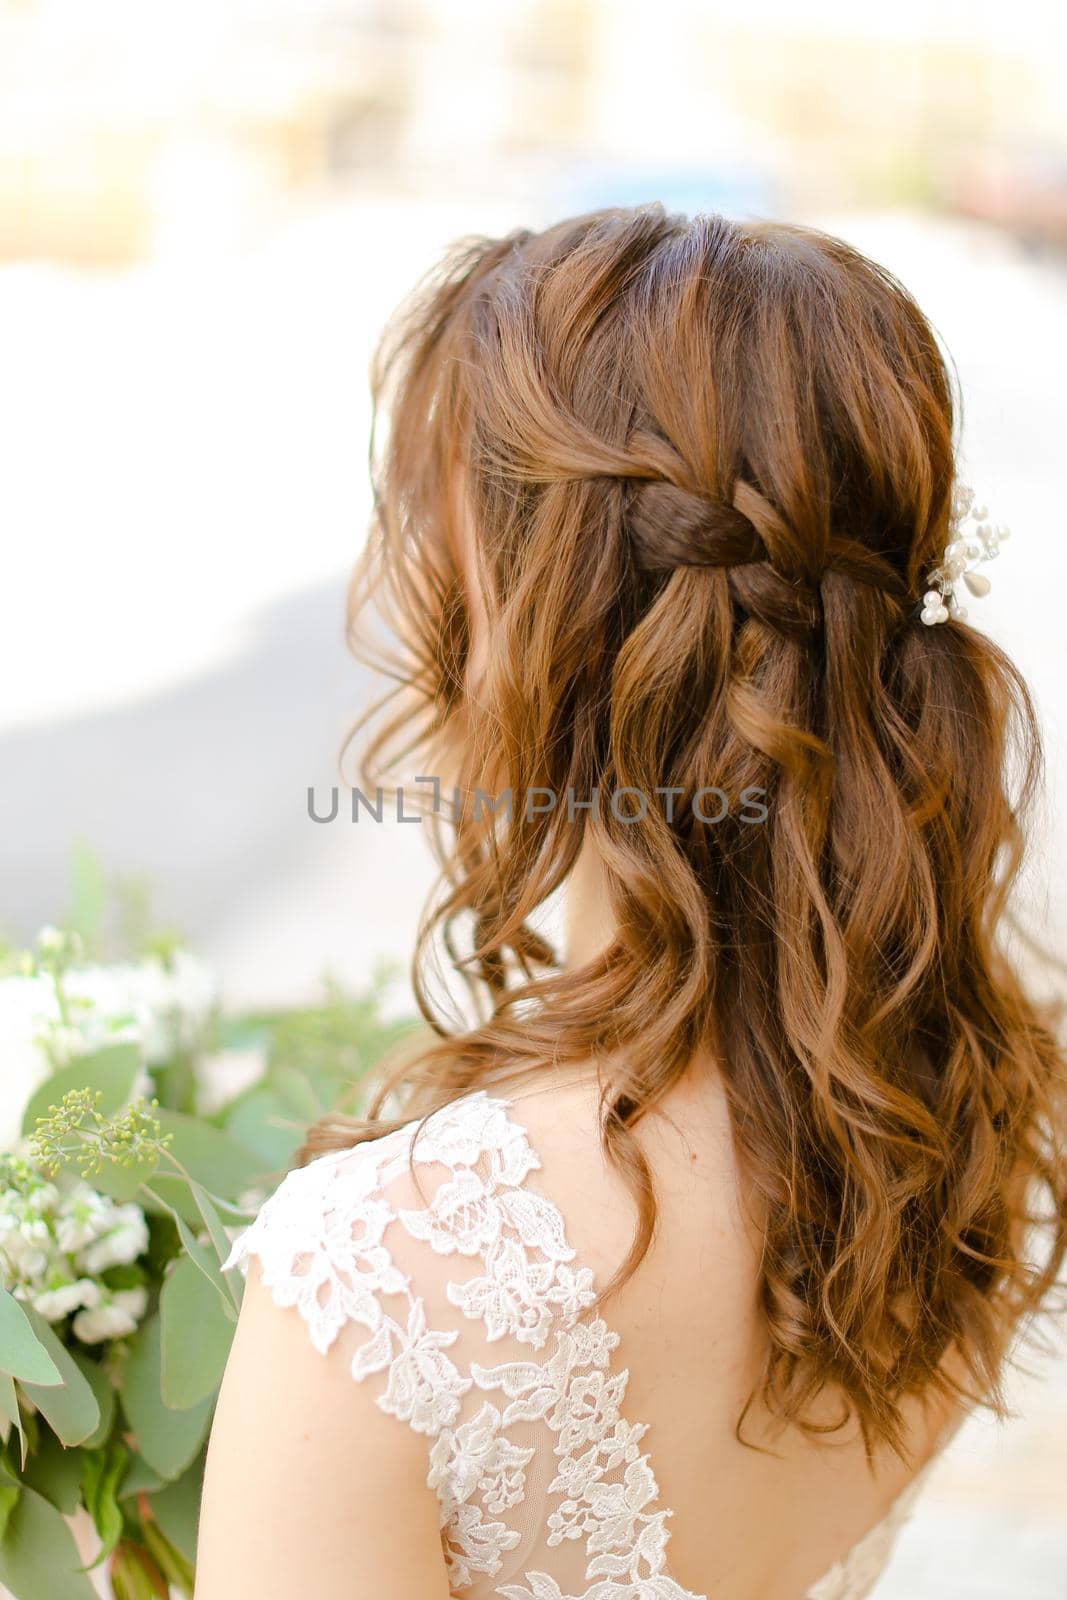 Back view of brown curls for bride keeping flowers. Concept of wedding photo session and stylish hair do.